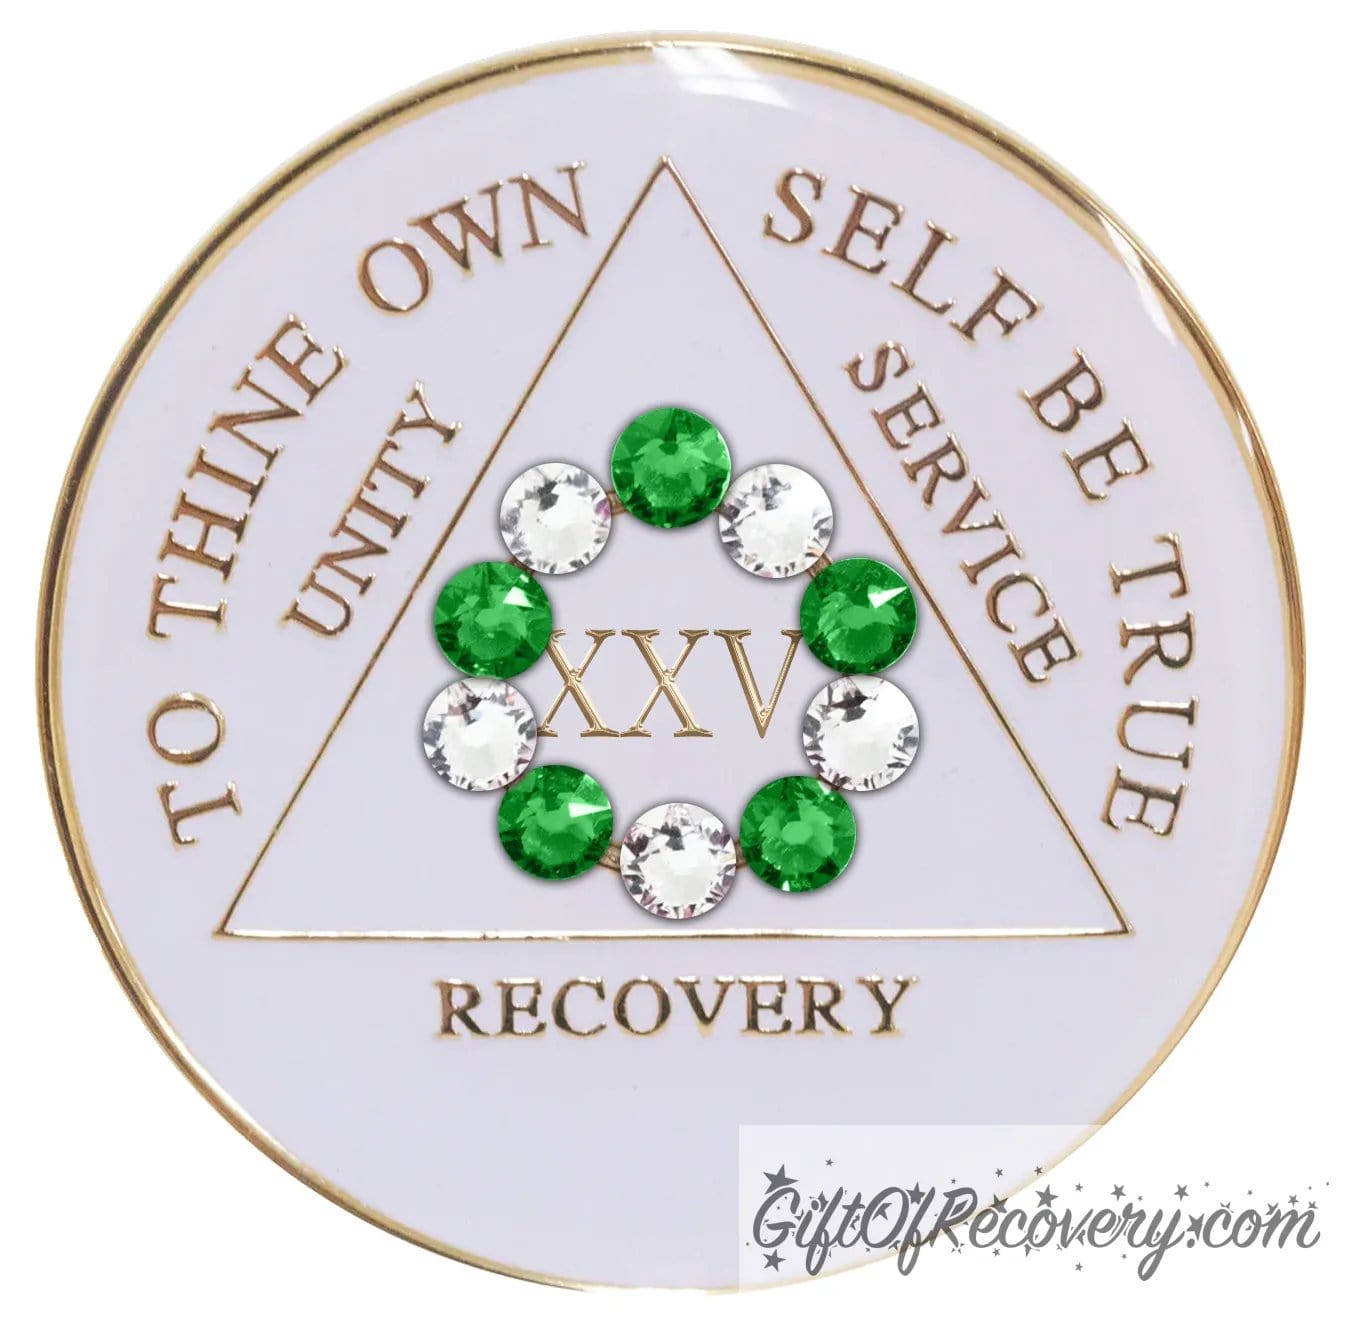 Sobriety Chip AA 10th Step Fern Green Crystallized Bling White Triplate 25 Years